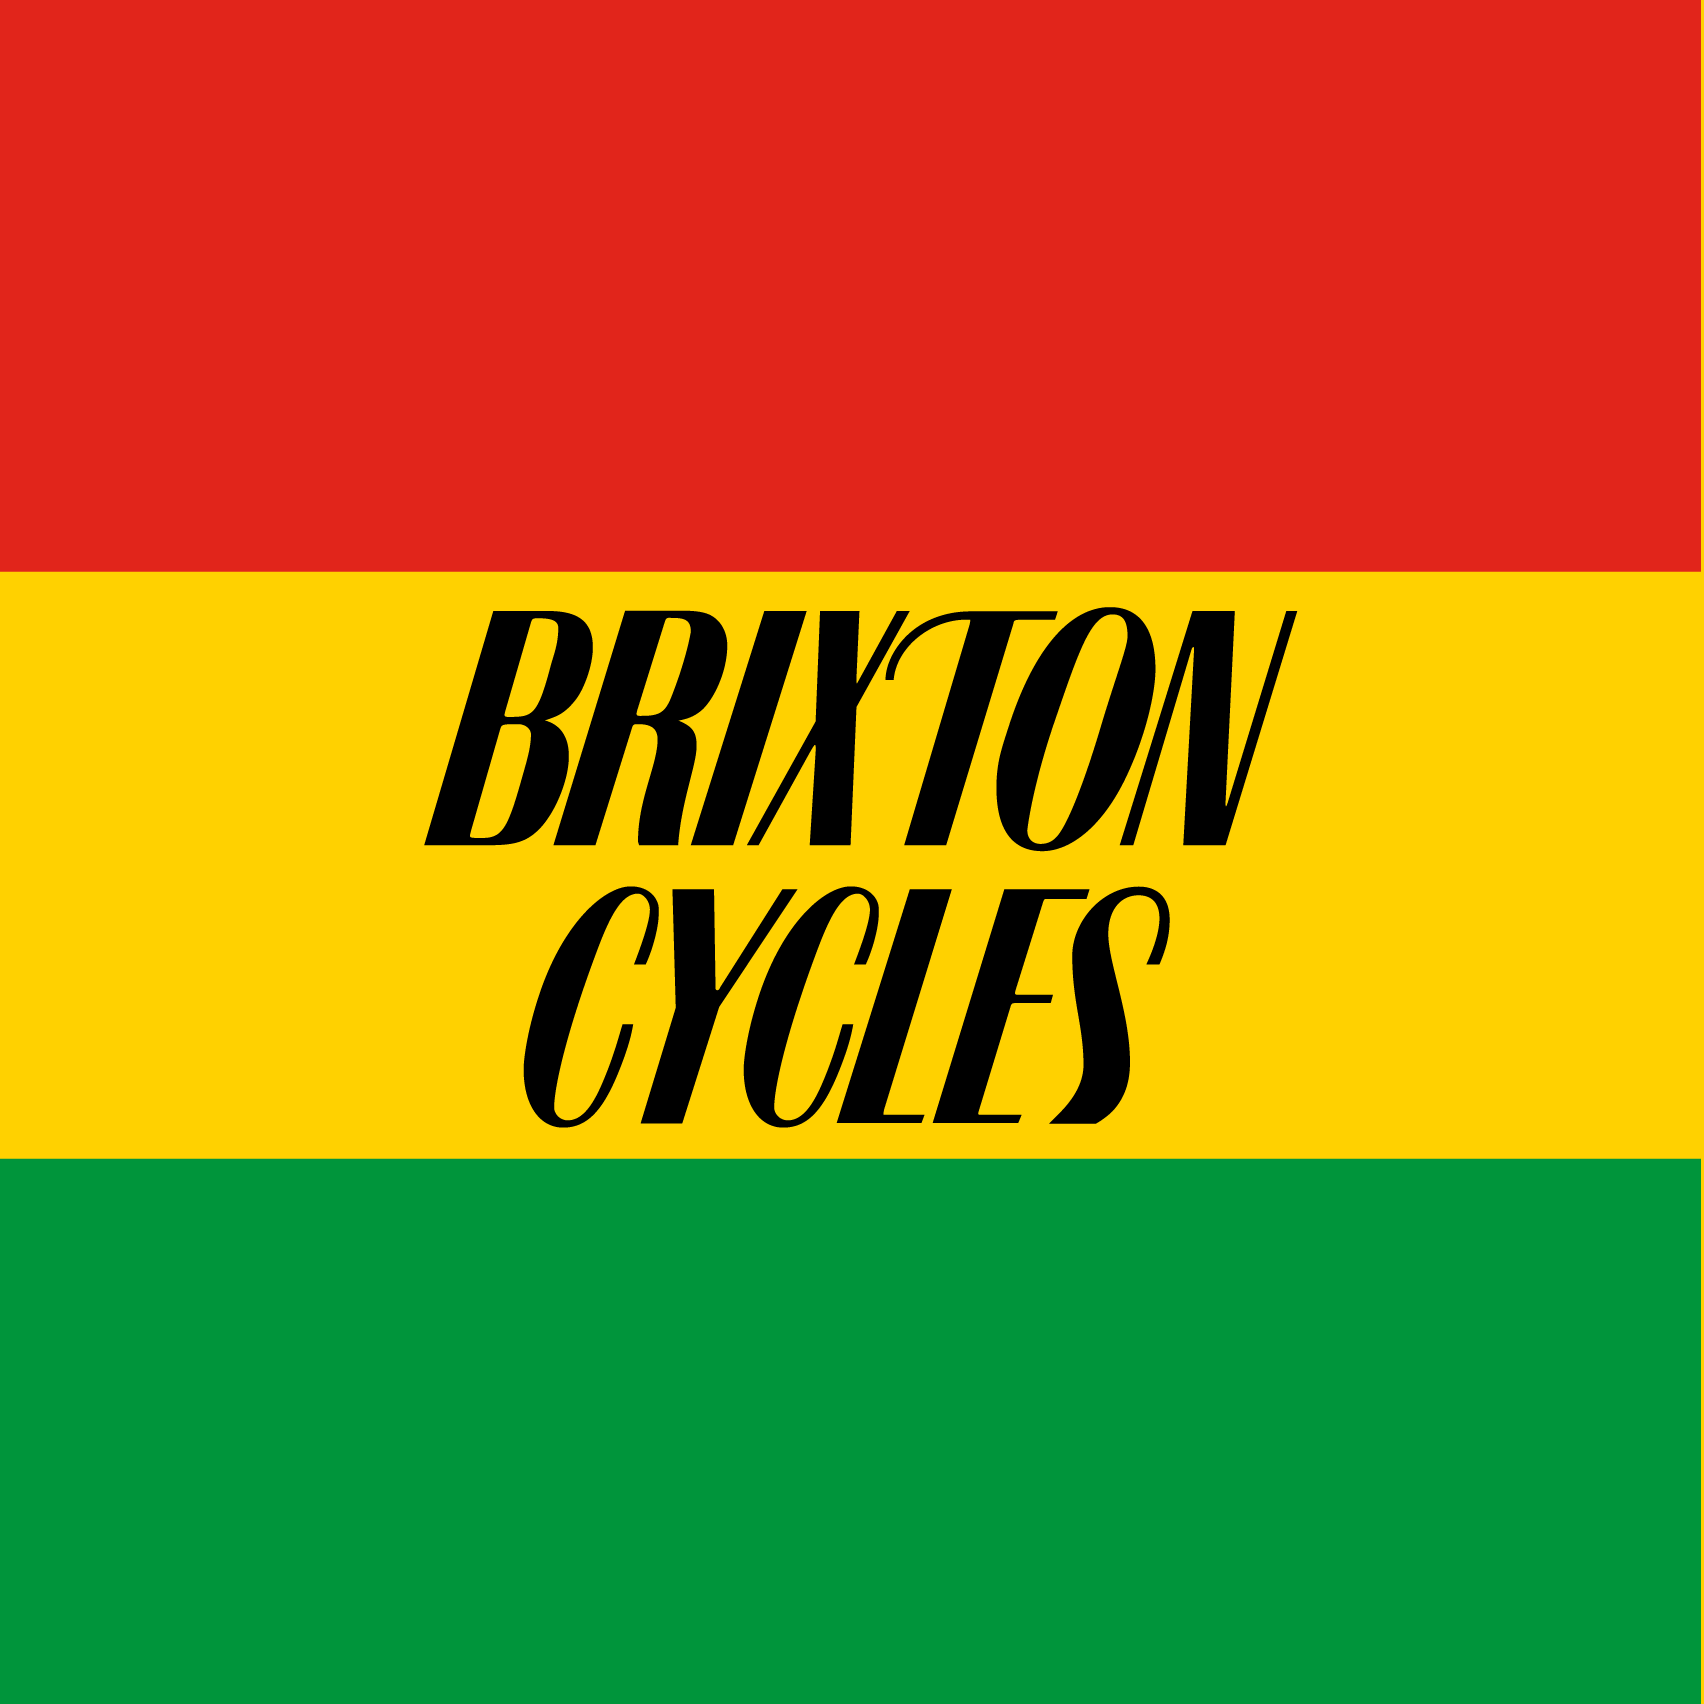 Club Image for BRIXTON CYCLES